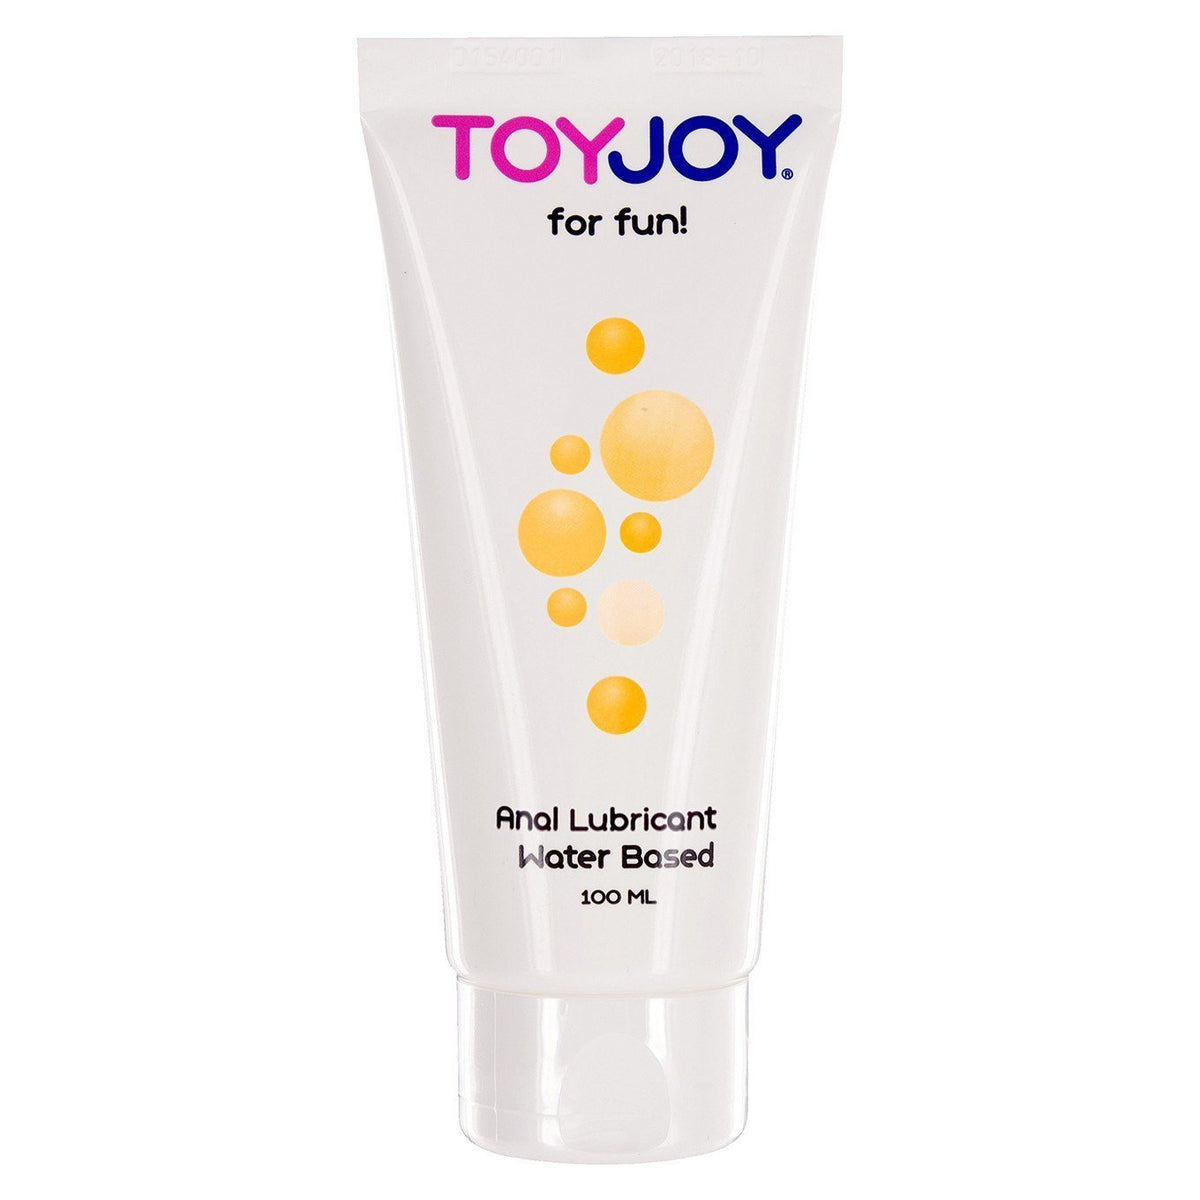 ToyJoy - Anal Lubricant Waterbased 100 ml (Lube) -  Anal Lube  Durio.sg